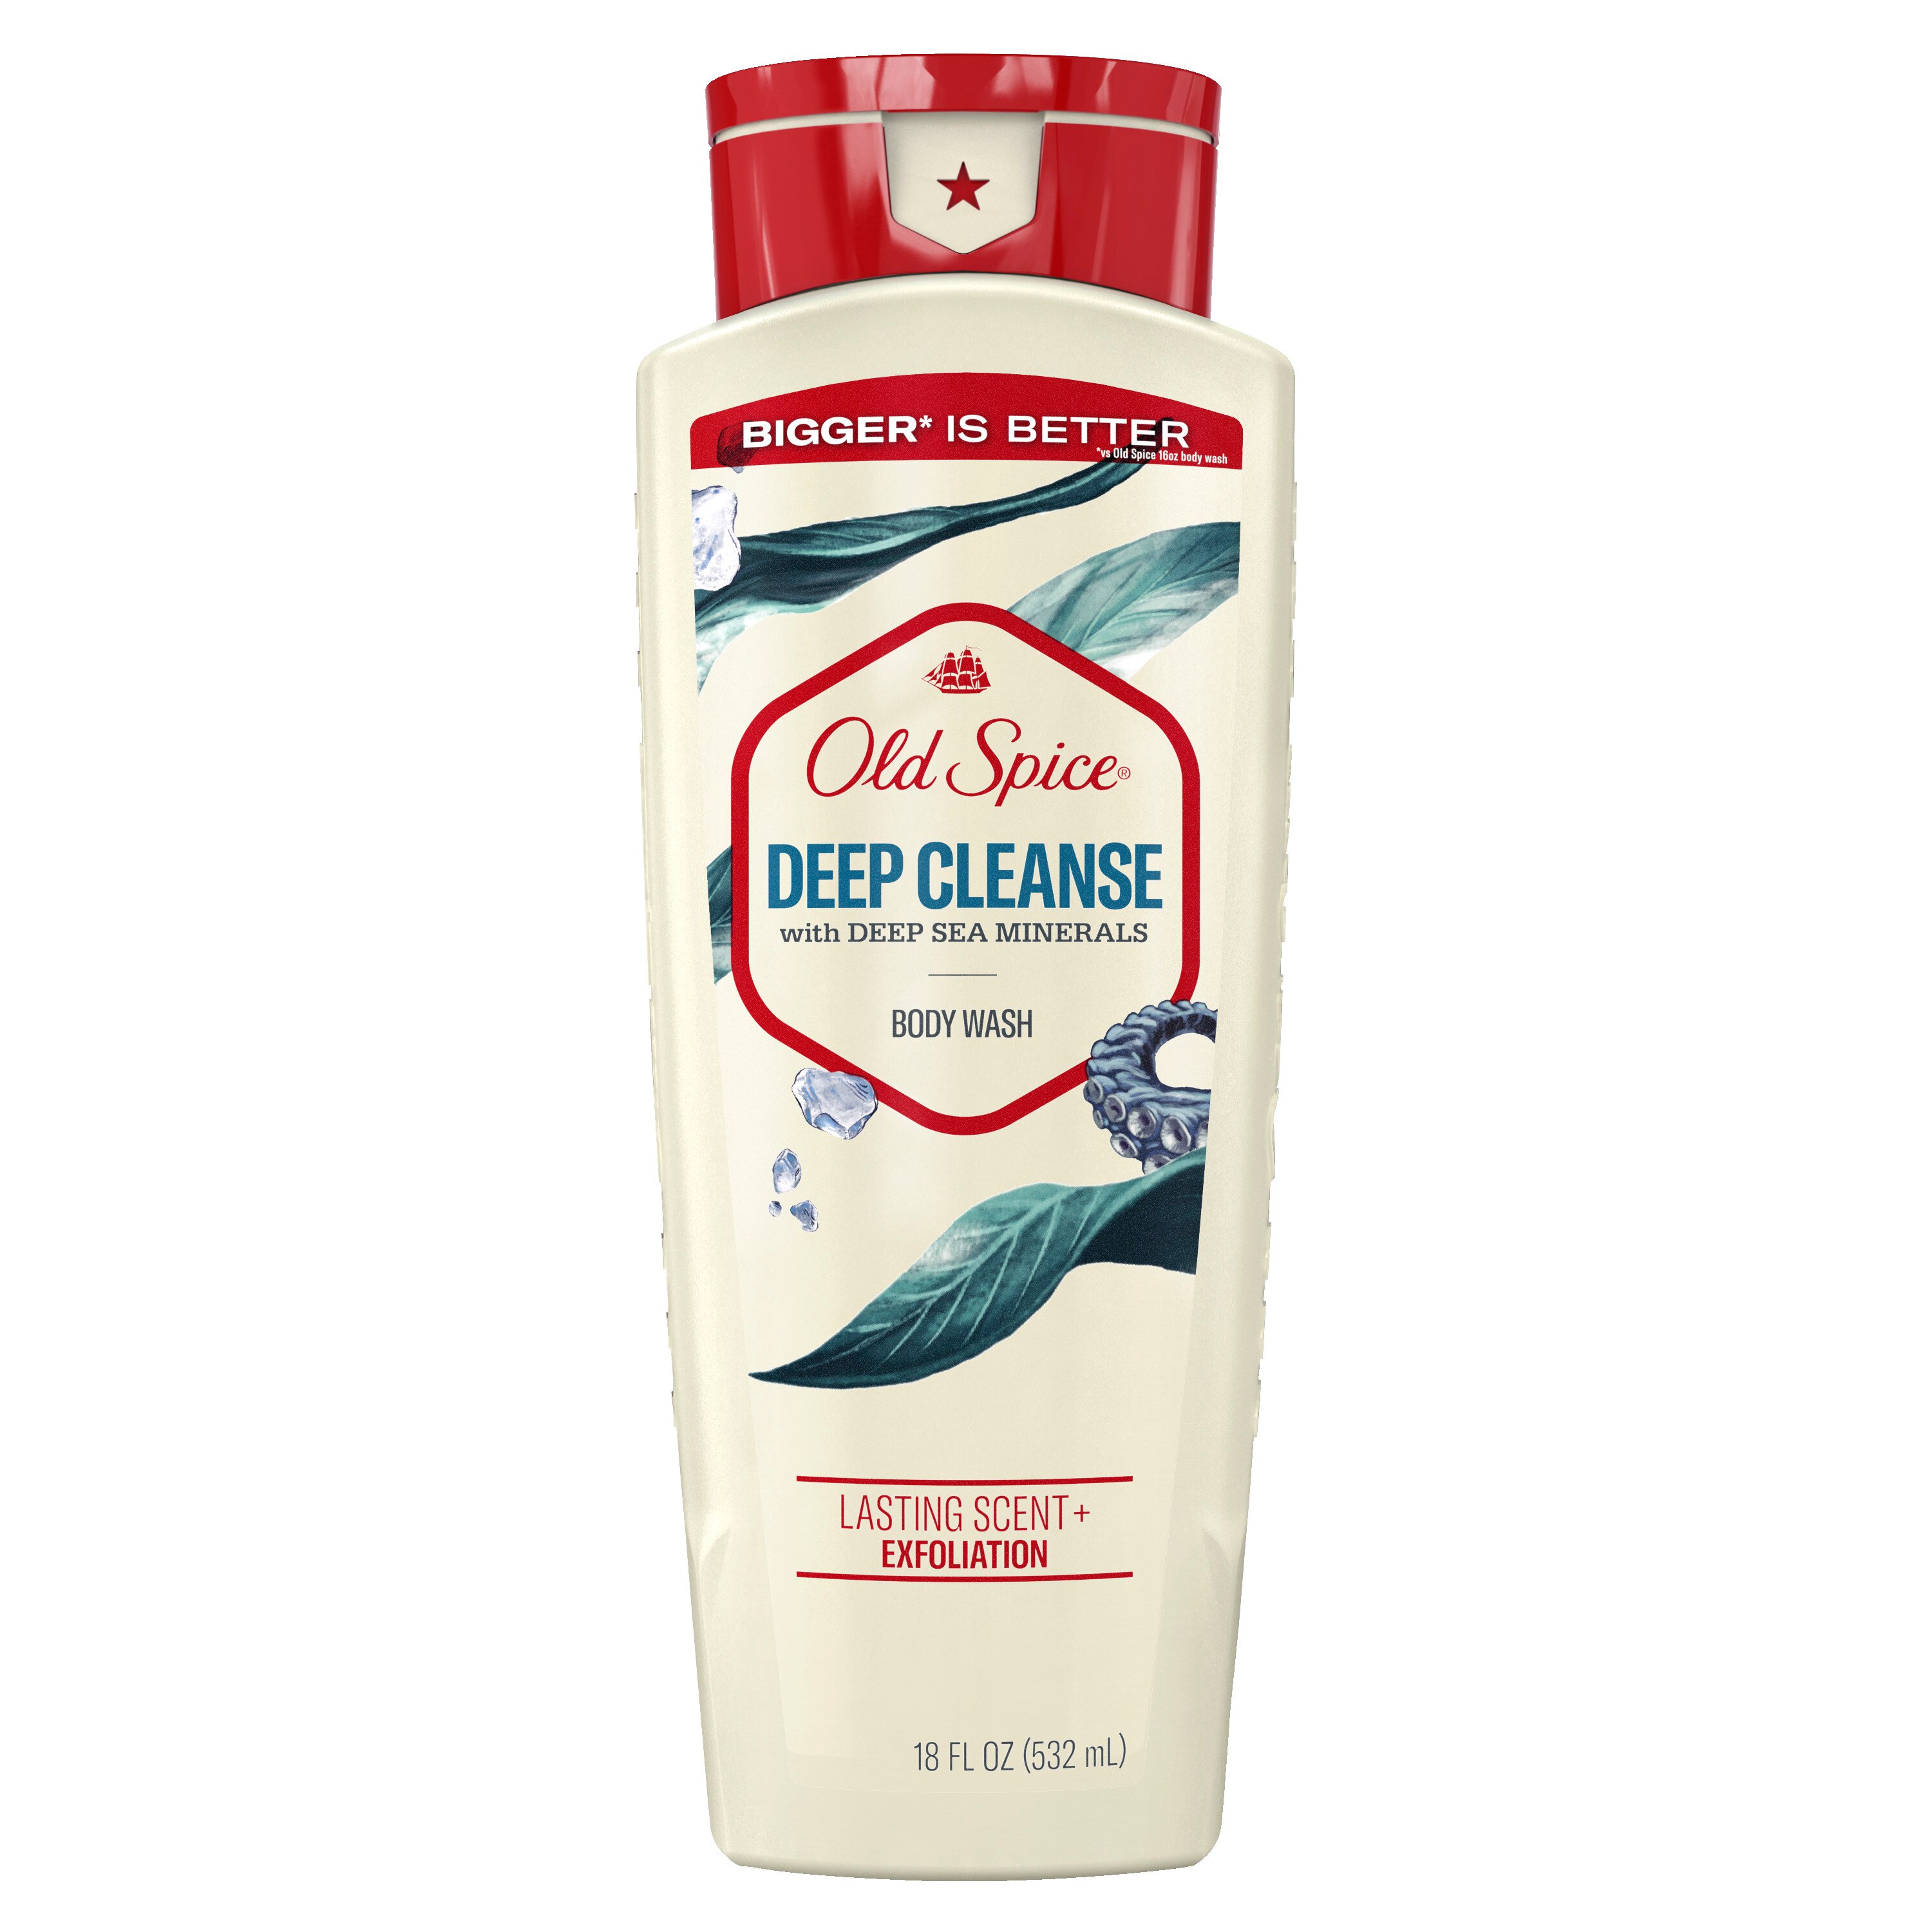 Old Spice Body Wash for Men, Deep Cleanse